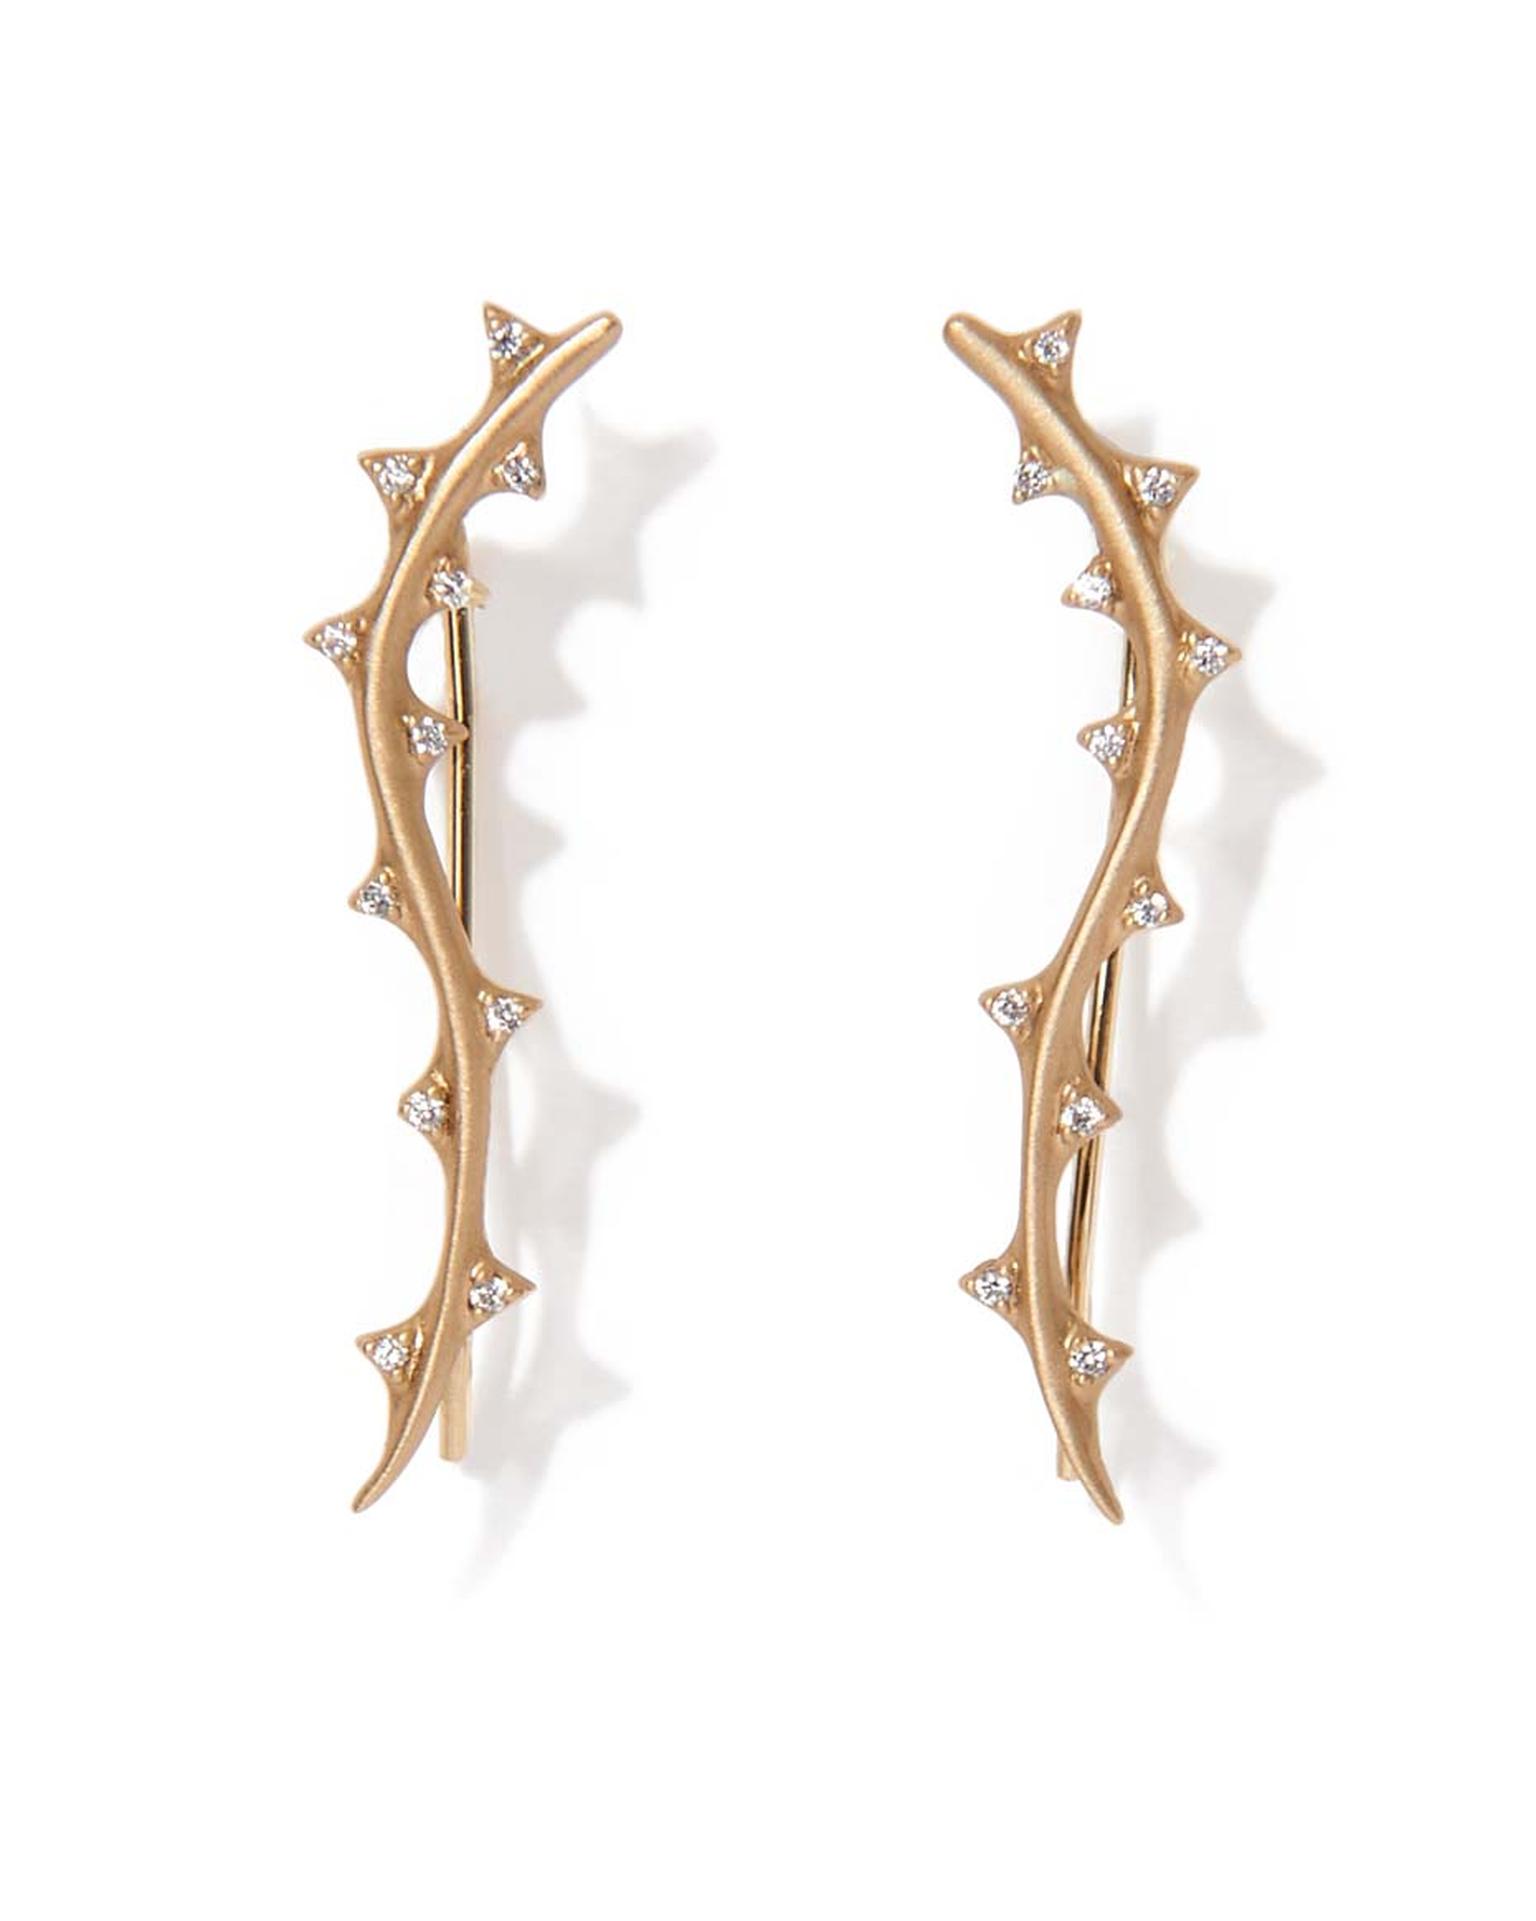 Michelle Fantaci Thorn ear cuffs, available online from Stone & Strand